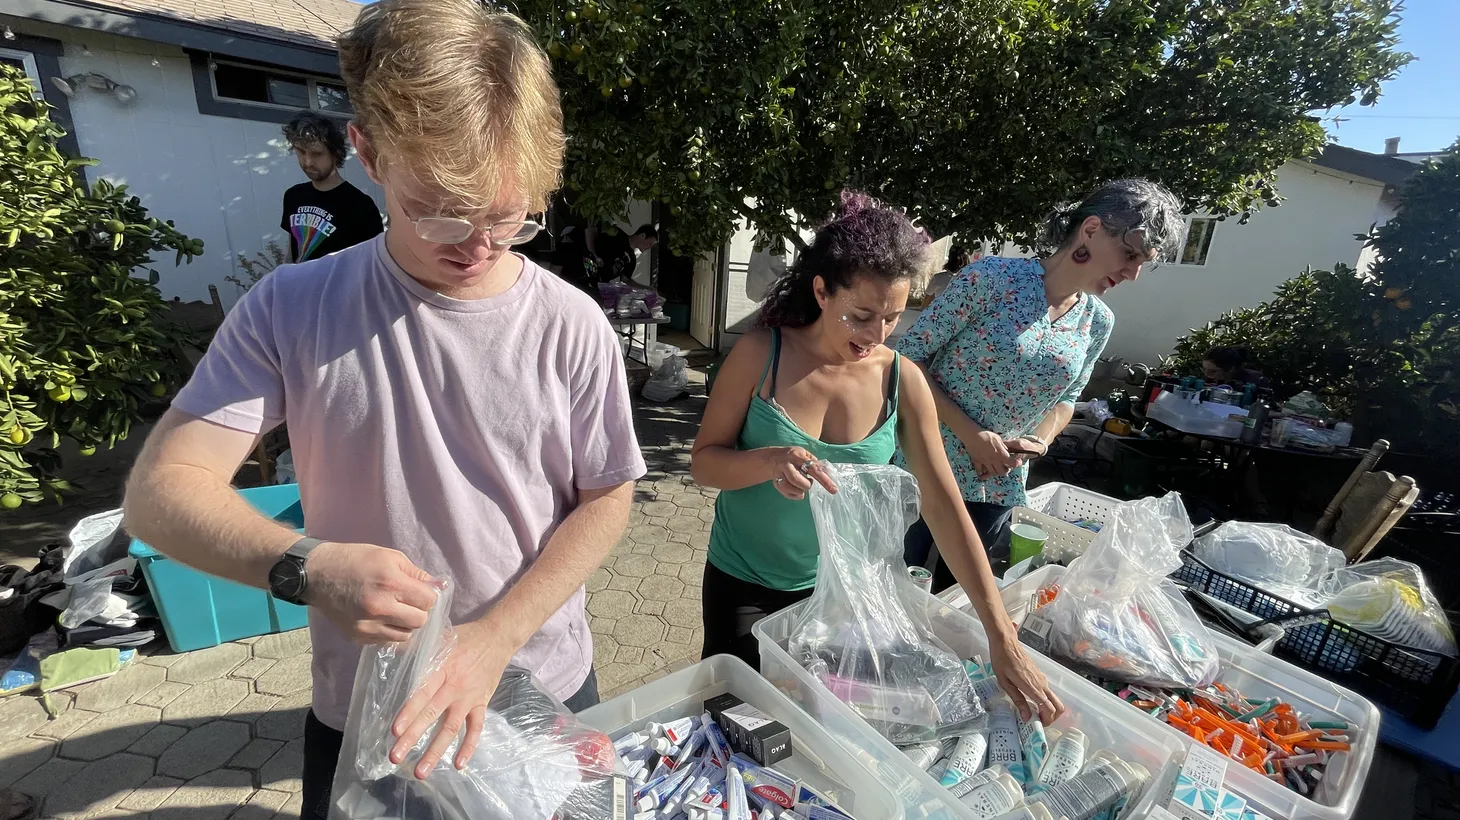 The Mutual Aid LA monthly dispatch has dozens of suggestions for how to give back in LA, whether you prefer making homemade meals, doling out hygiene kits, or distributing art supplies.